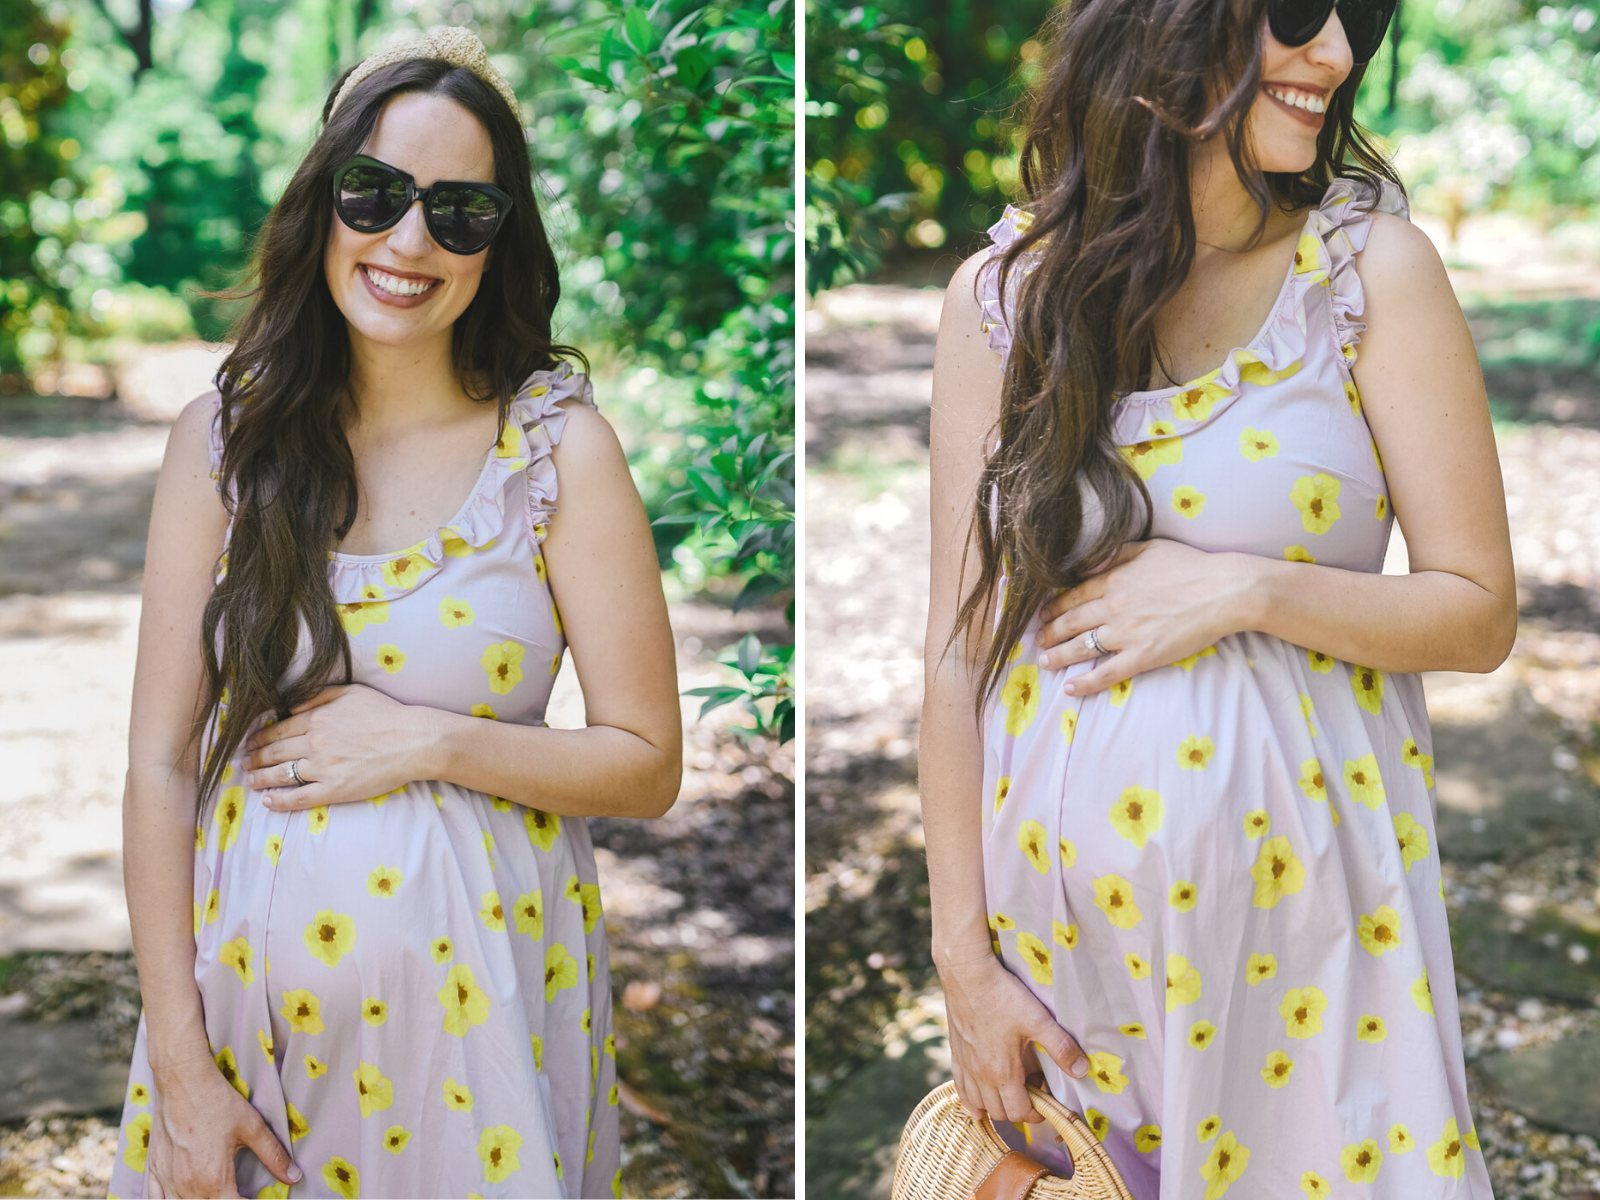 Pregnancy Tips by popular Memphis motherhood blog, Lone Star Looking Glass: image of a woman standing outside on a stone path and wearing a Hatch The Rafaela Dress, Knotted raffia headband, black sunglasses, and Raye Judah Slide.